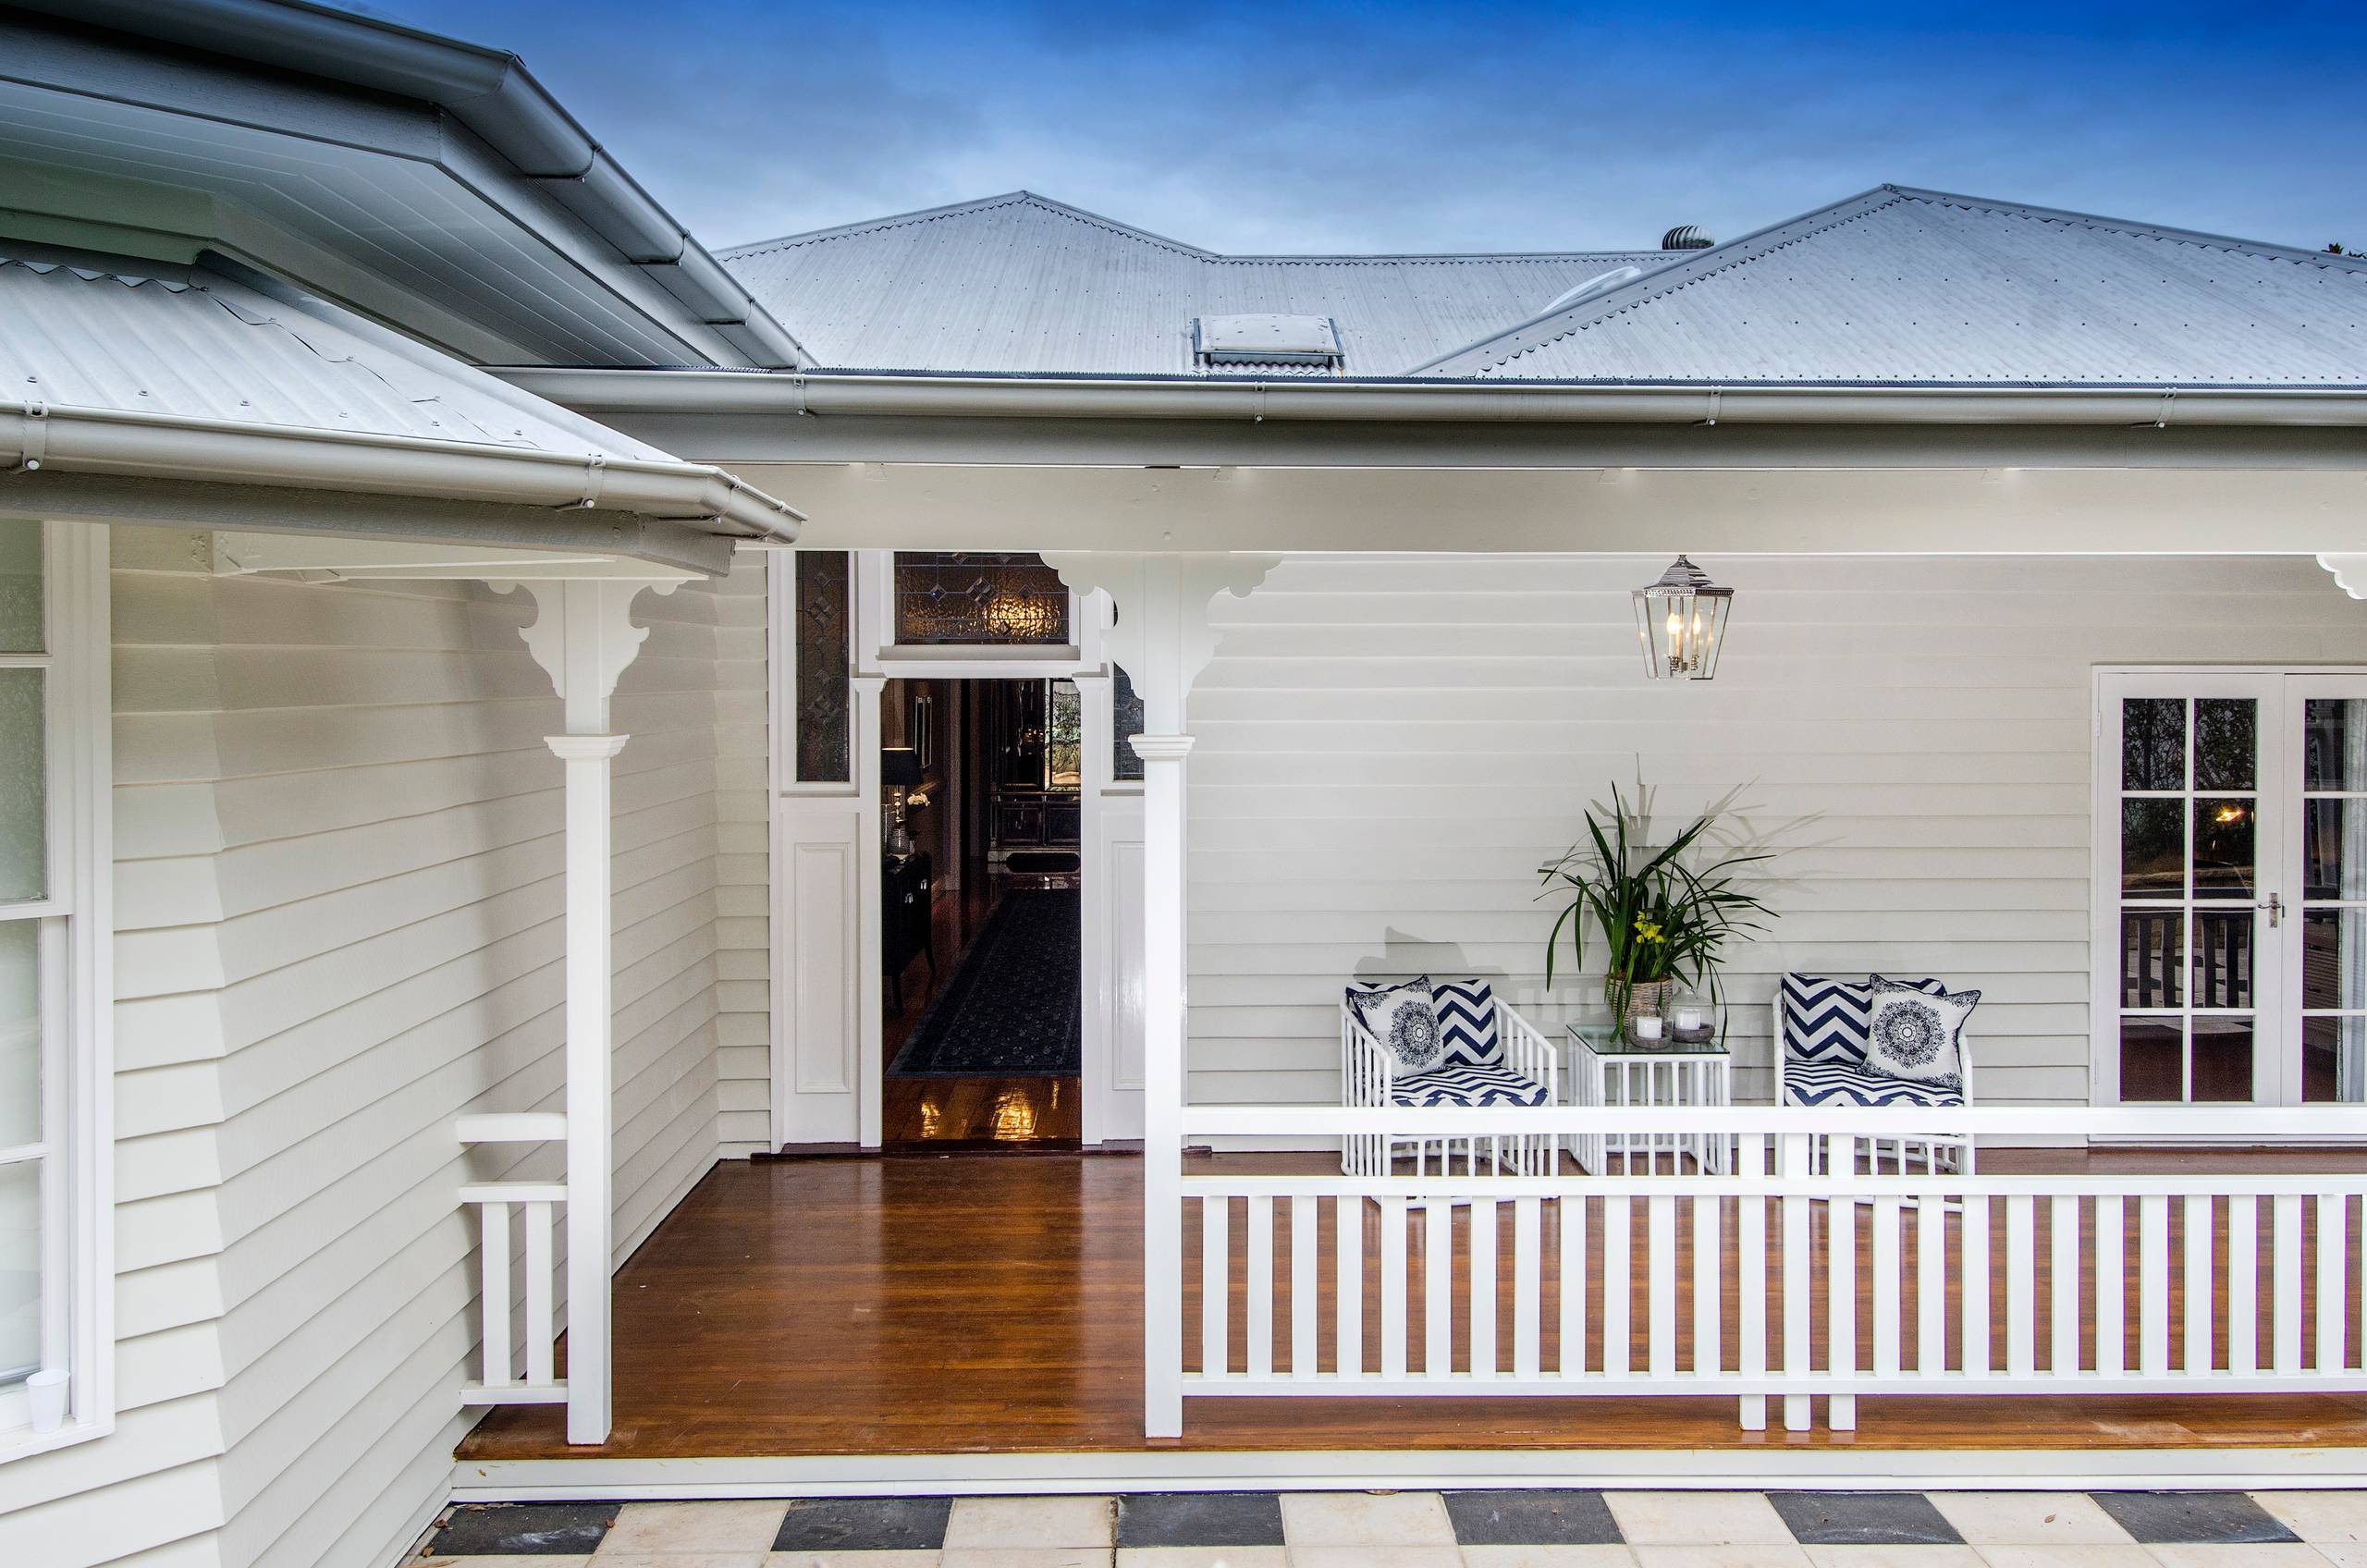 What Is a Veranda? - How Are Verandas Different from Porches?